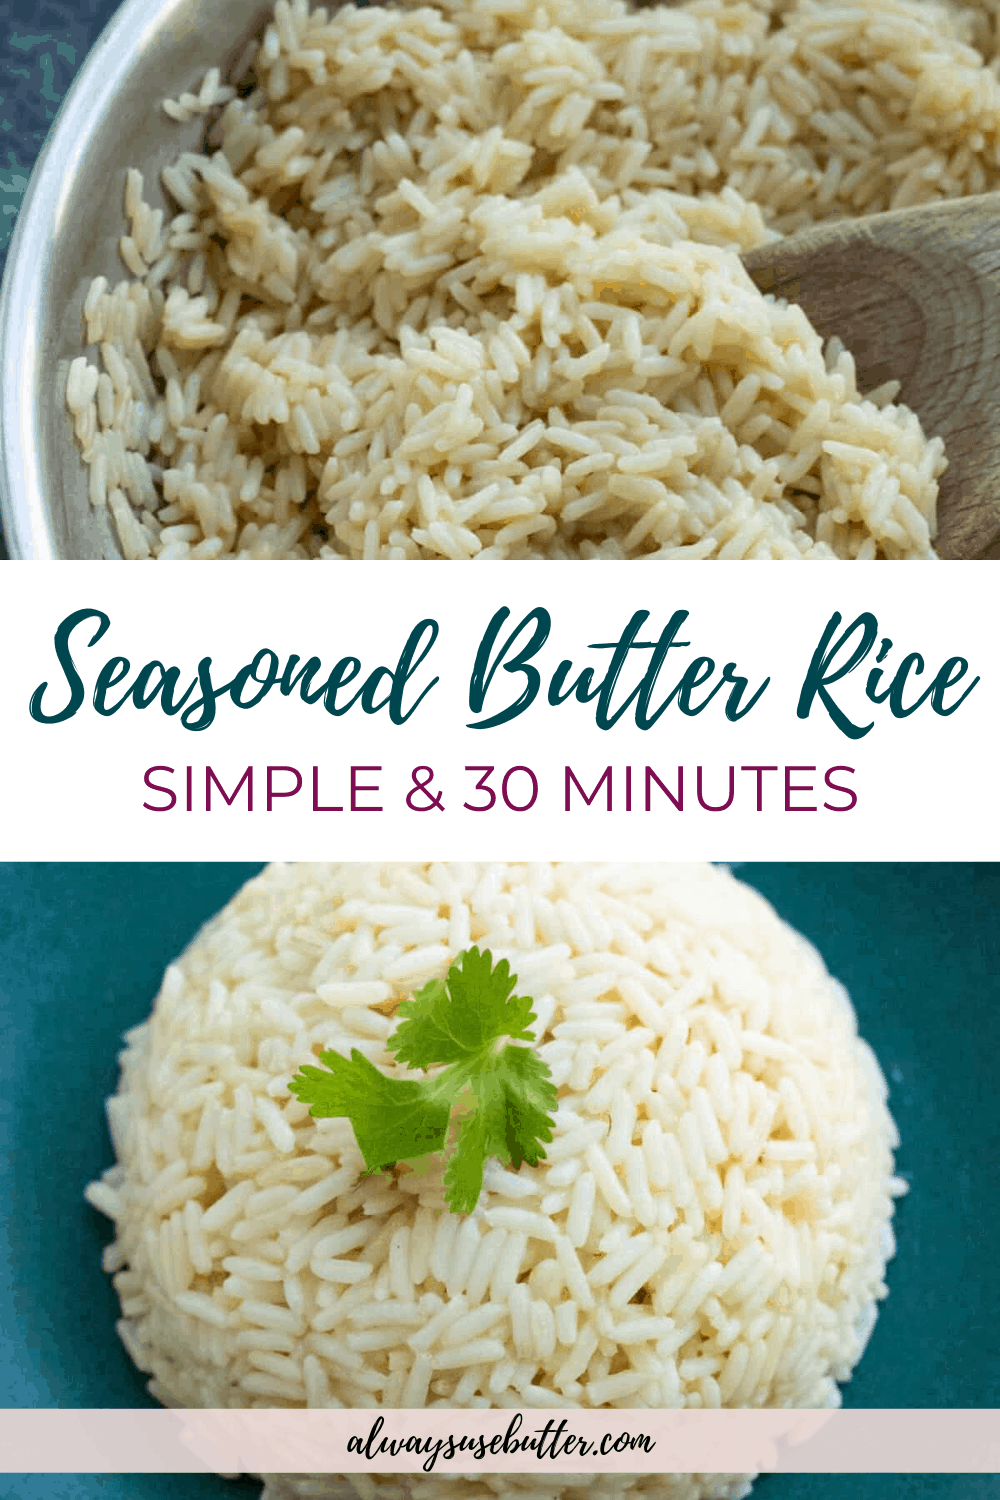 Seasoned Butter Rice [with Vegan Option] - always use butter